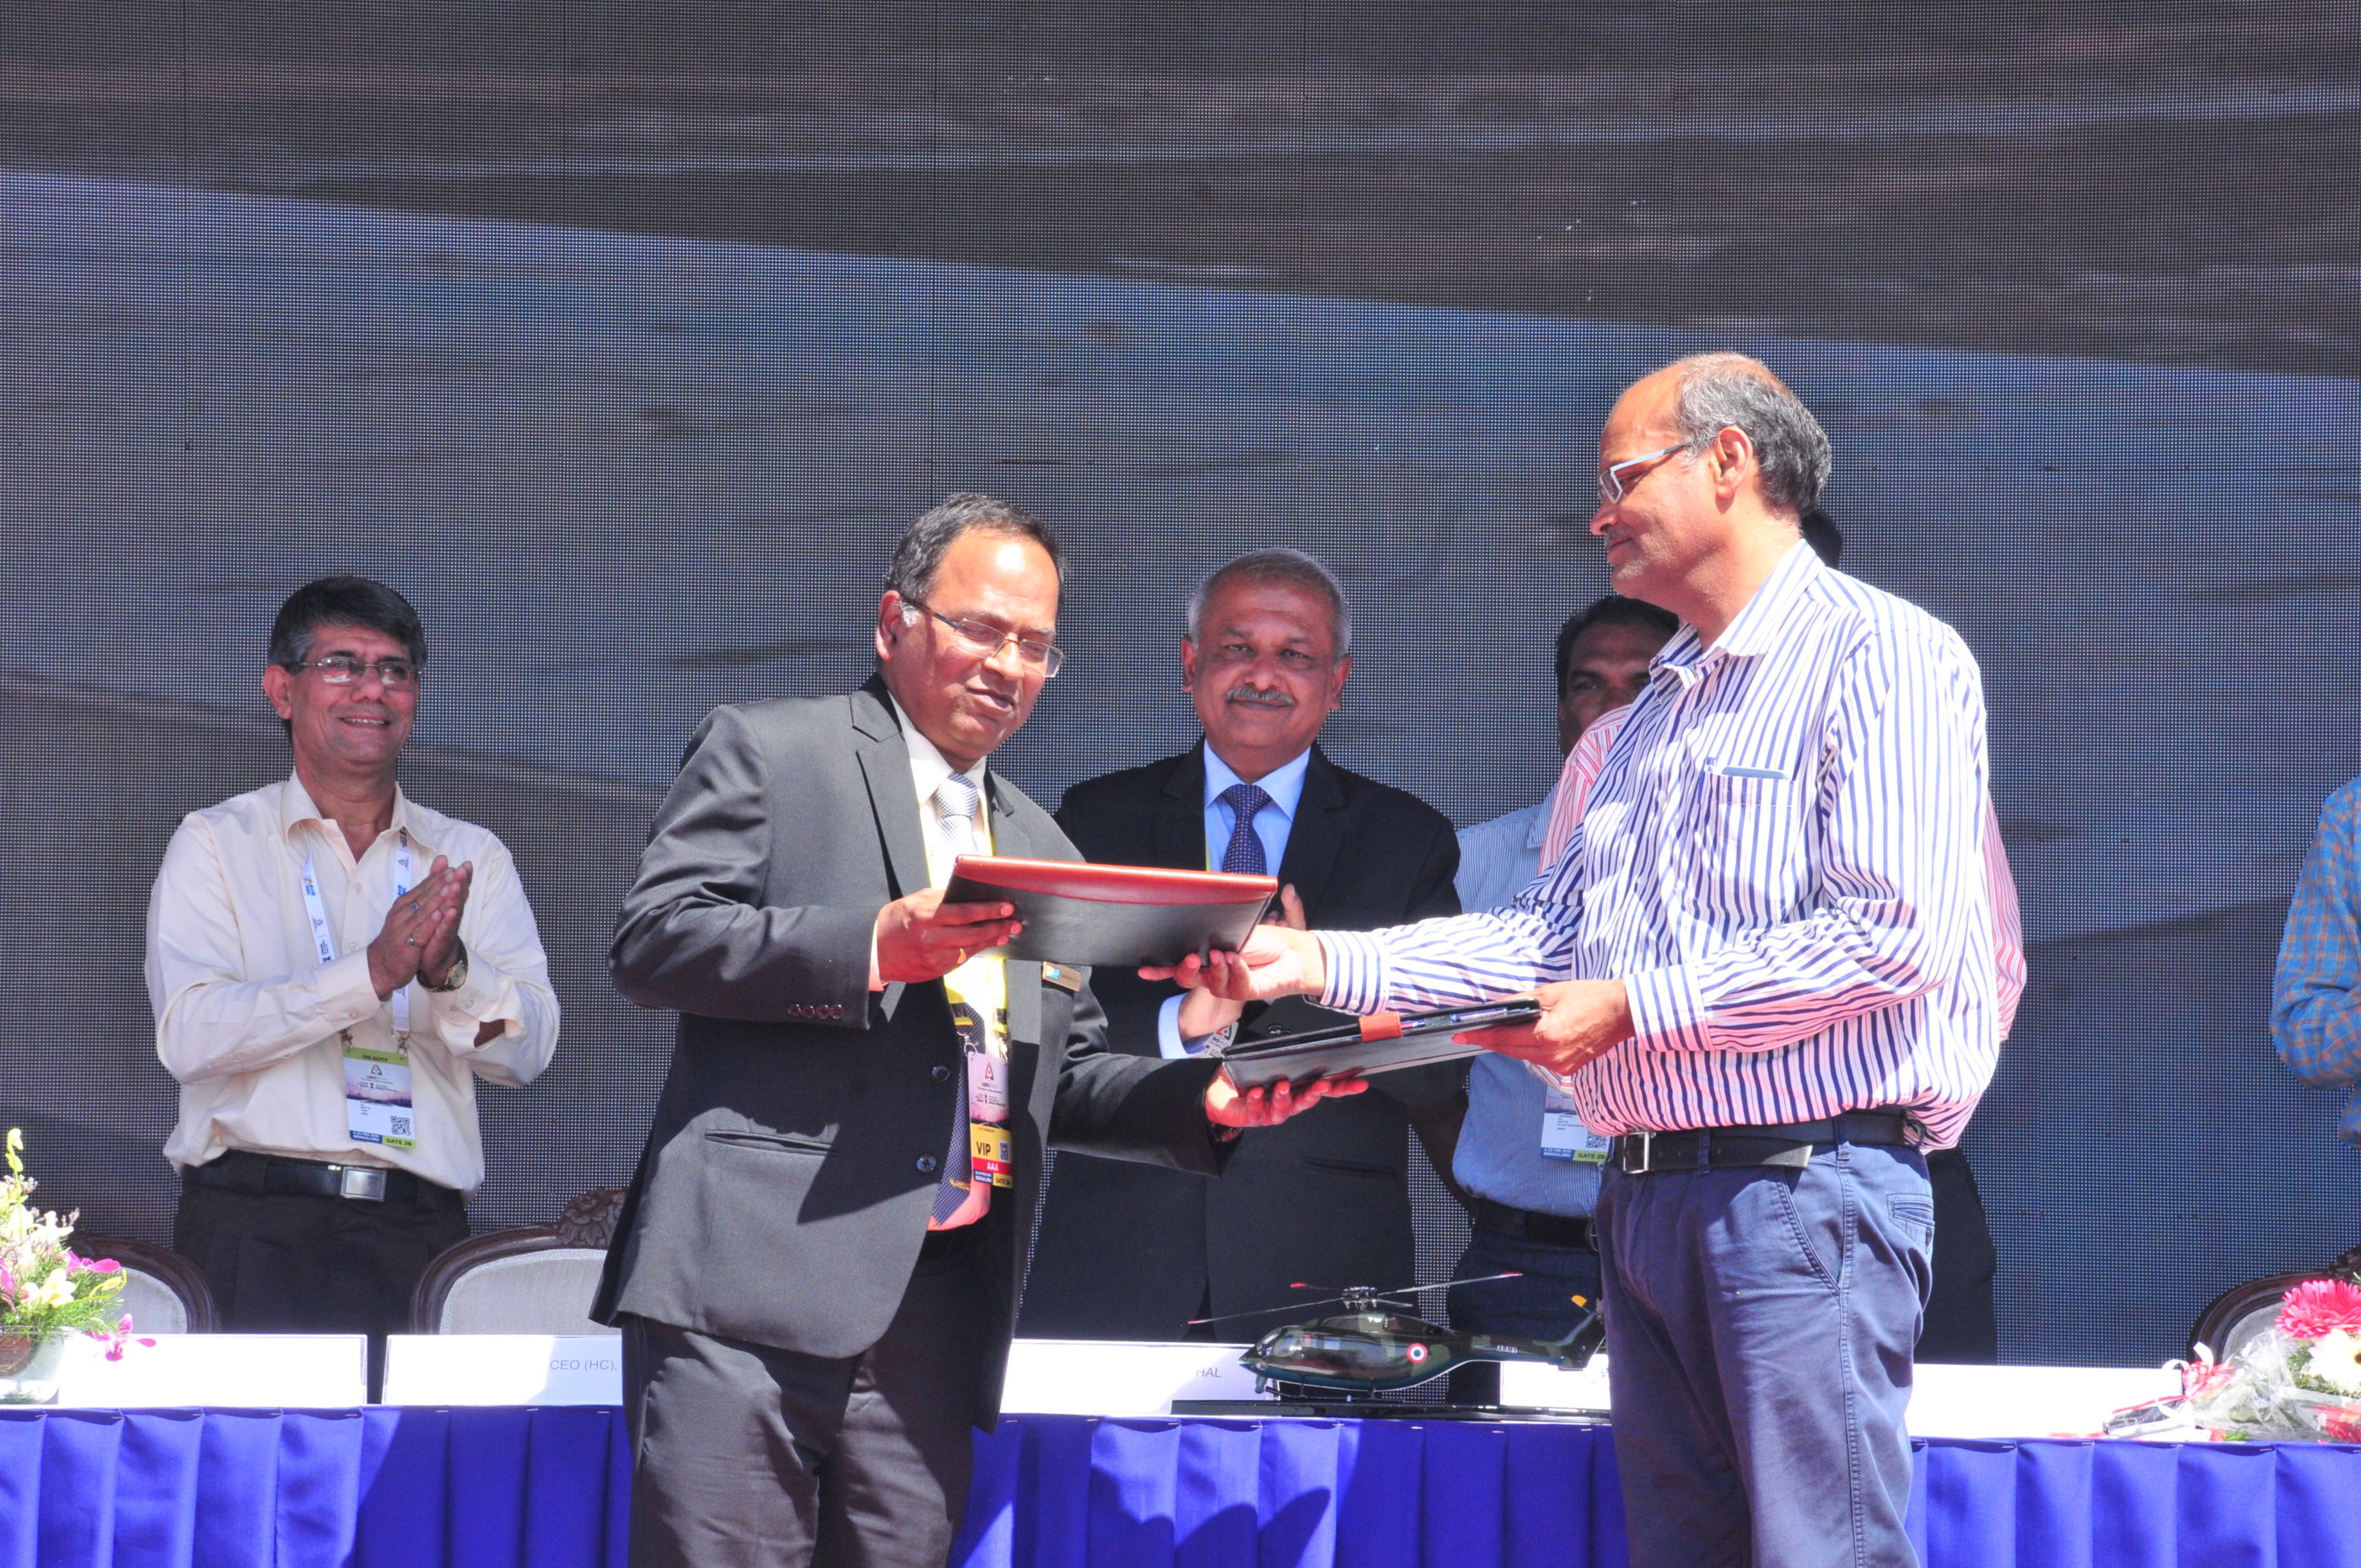 Representatives from HAL and CPWD celebrate the signing of the memorandum of understanding at Aero India 2019. HAL Photo